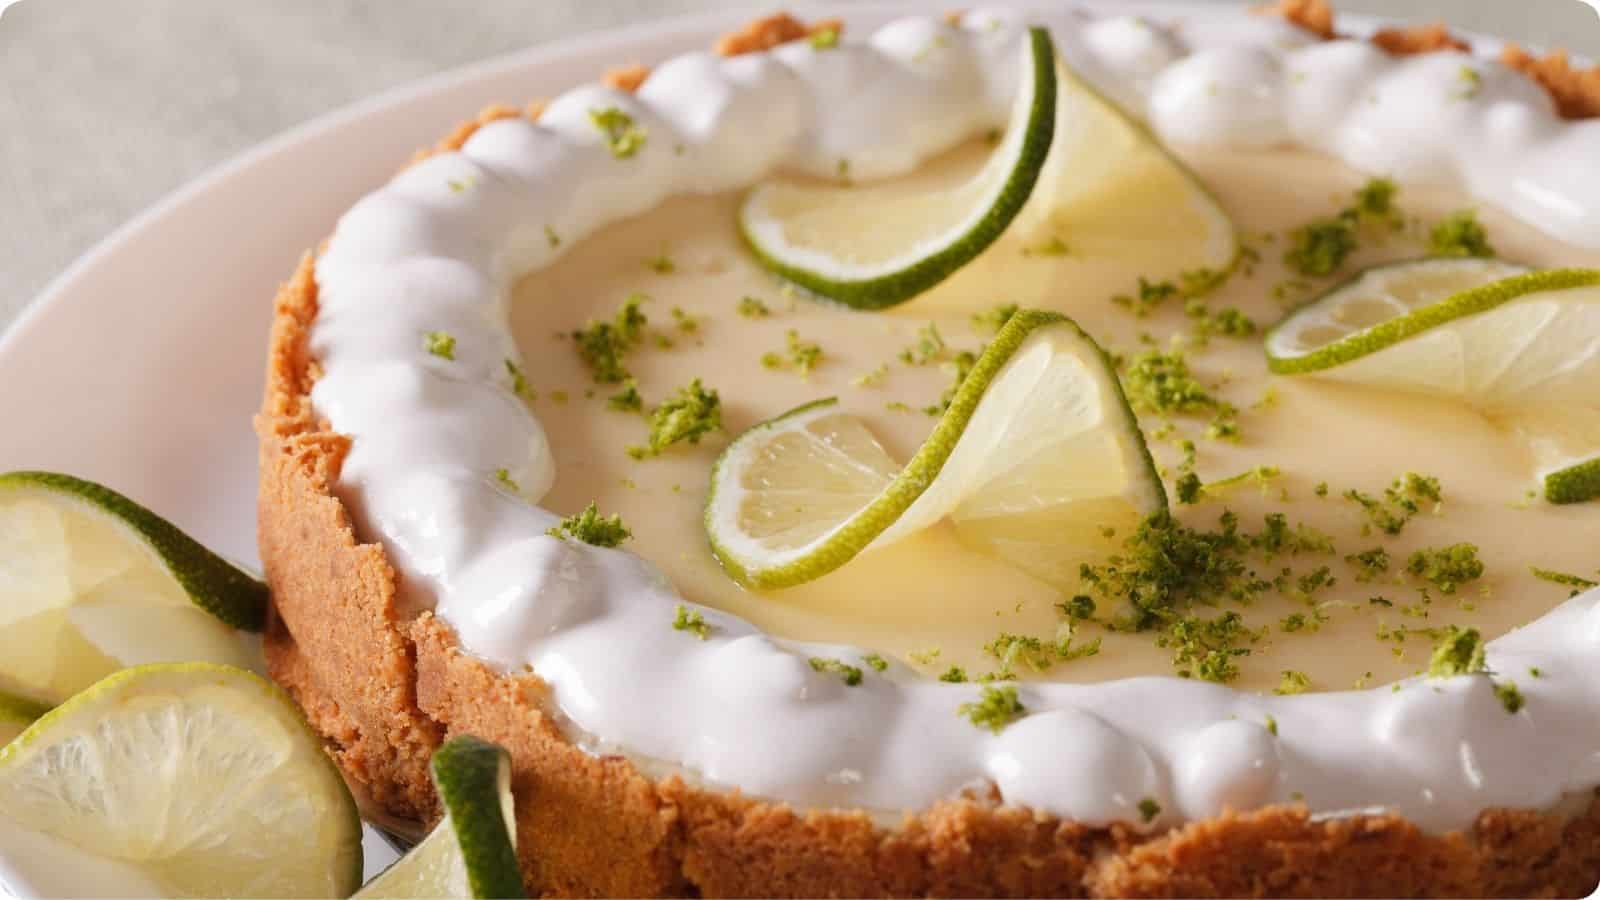 Key Lime Pie adorned with limes slices served on a plate.